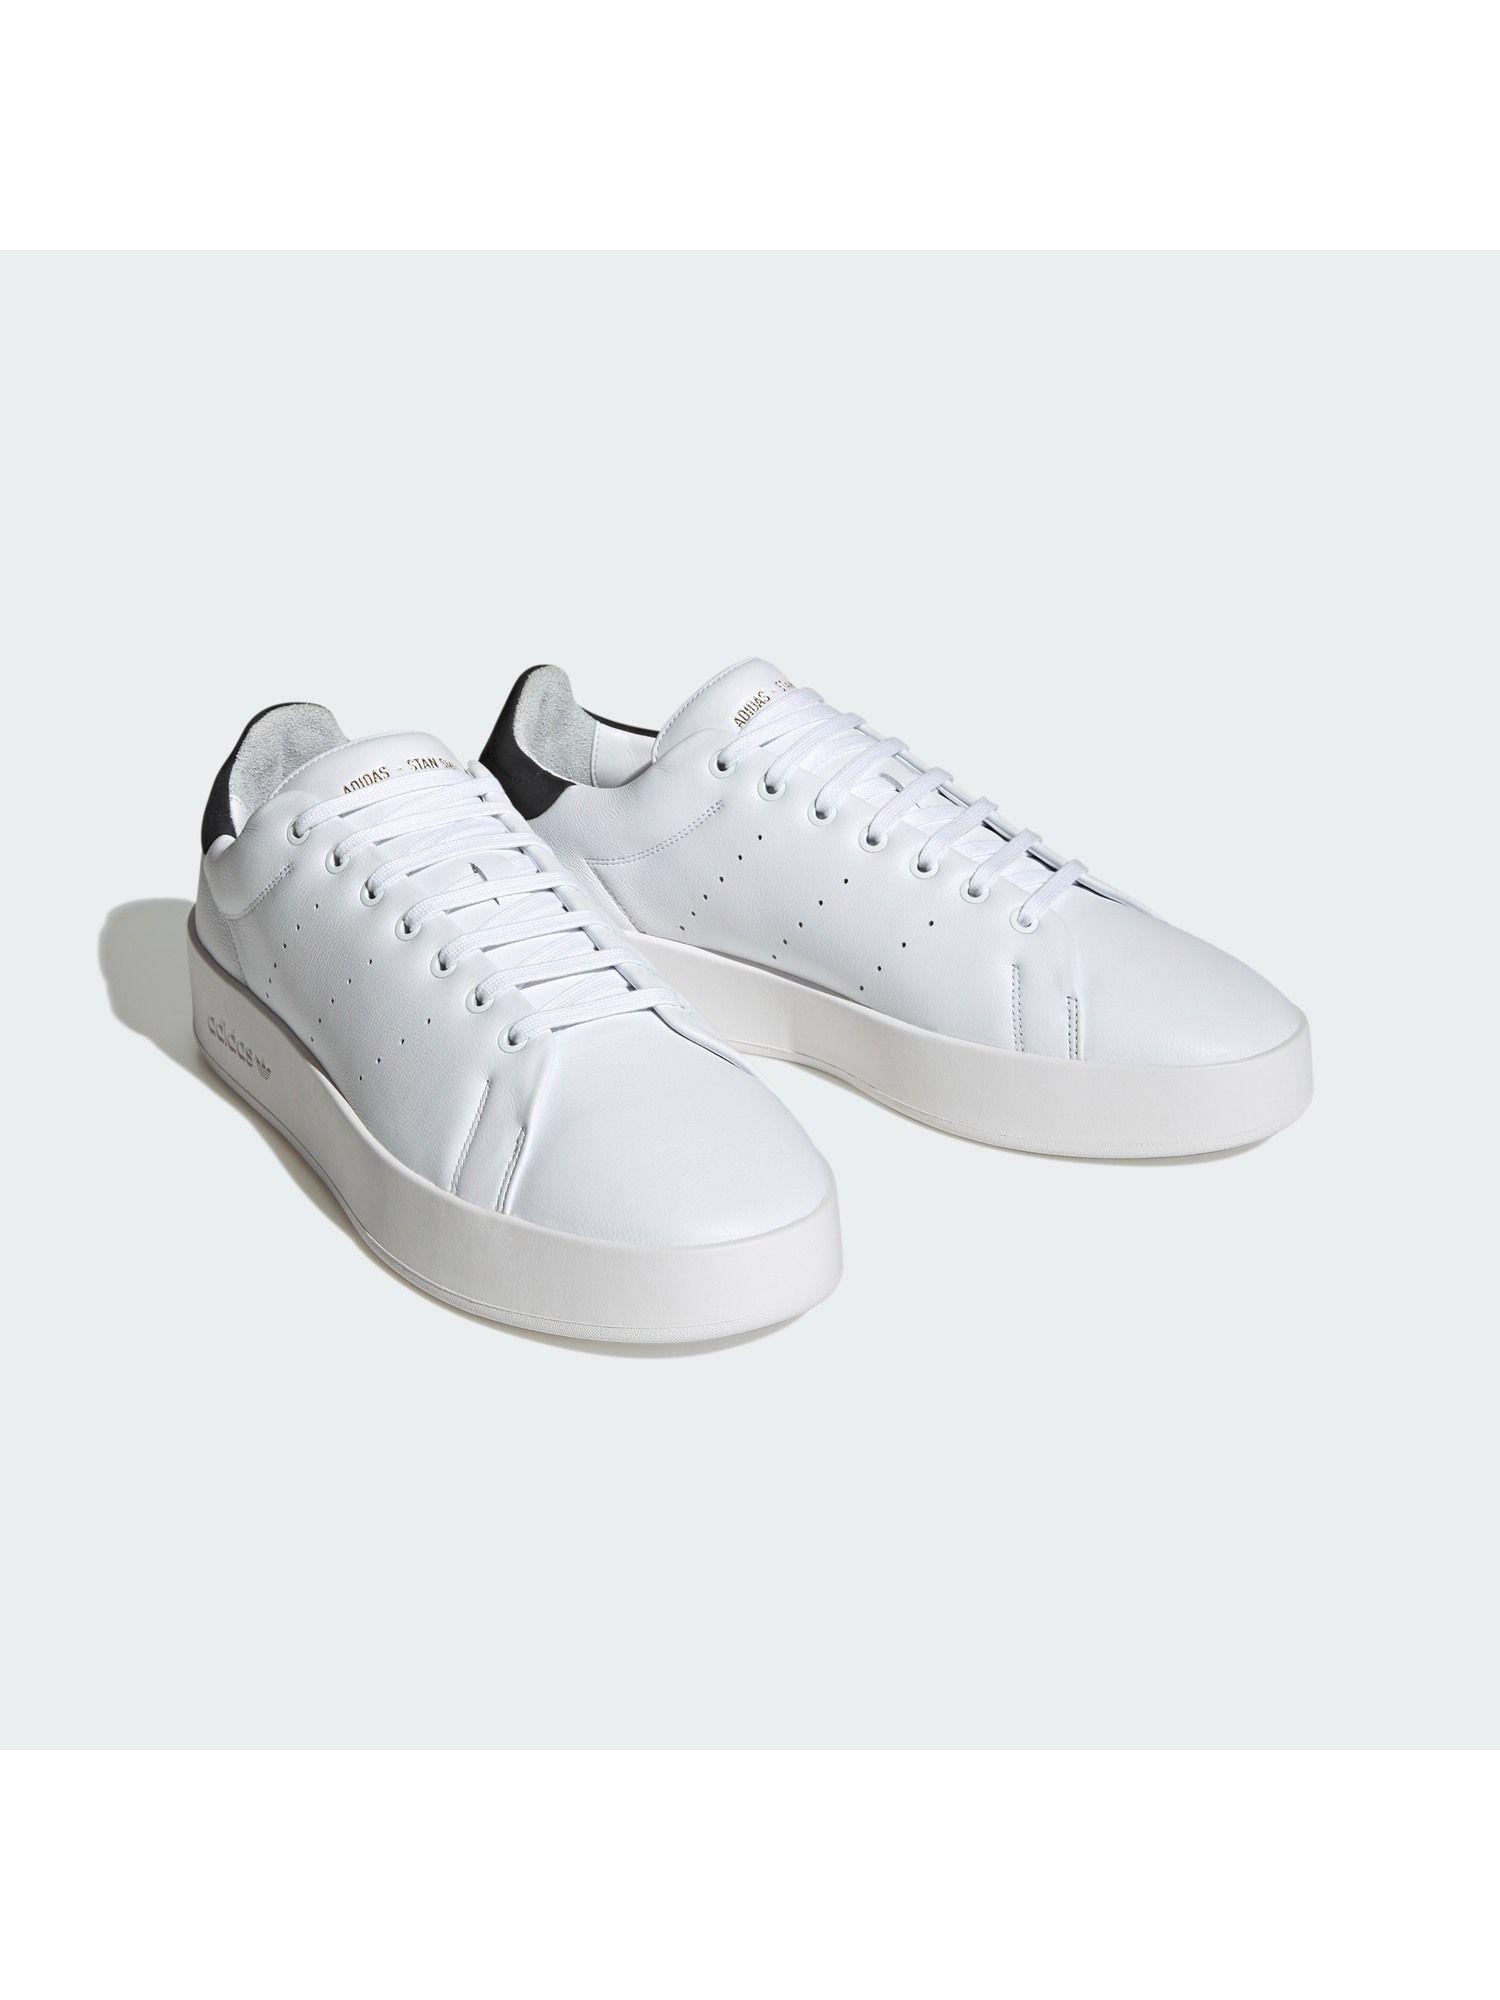 men stan smith relasted white casual sneaker shoes